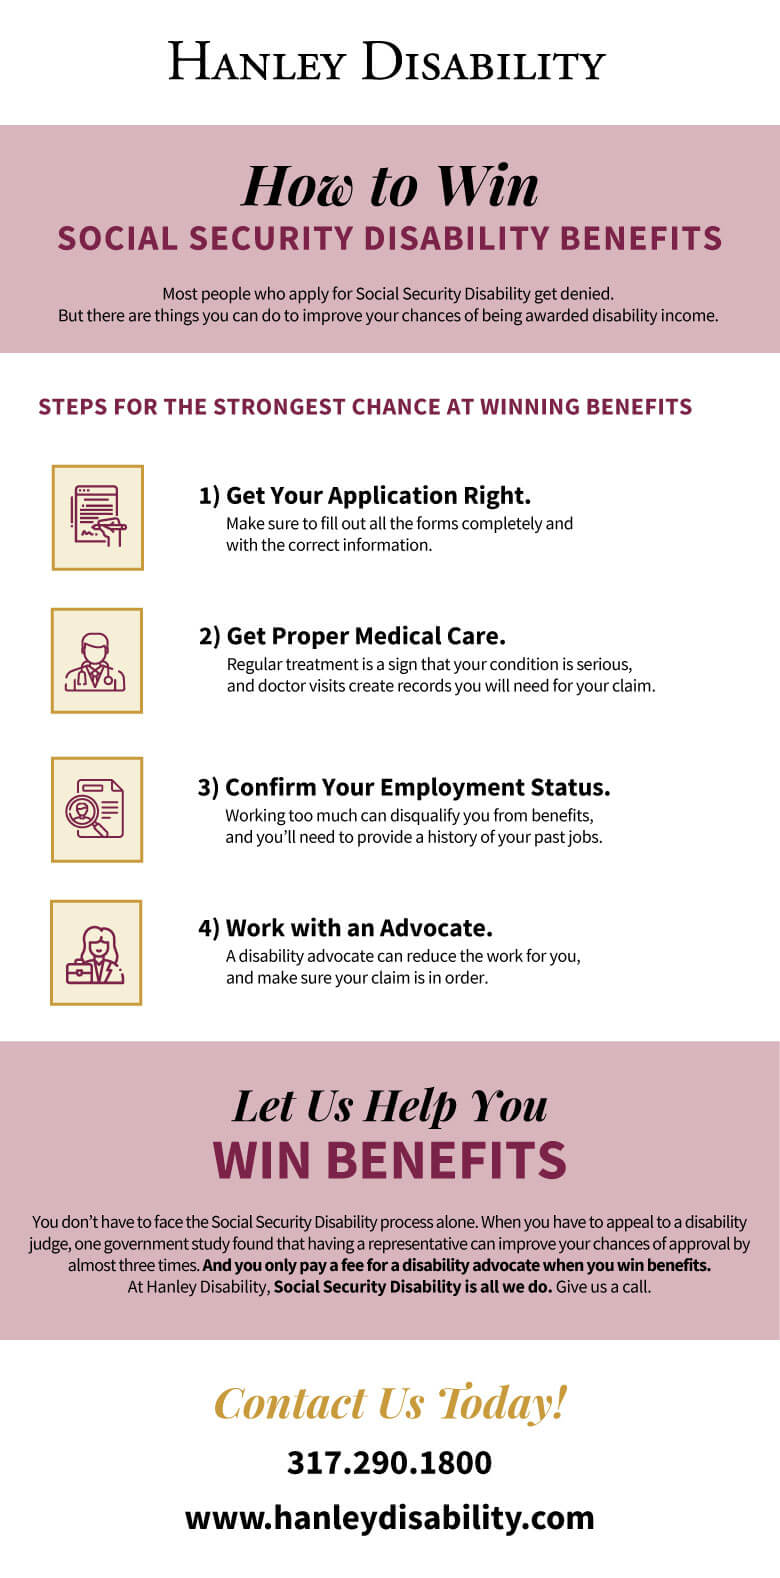 An infographic on how to win disability benefits.